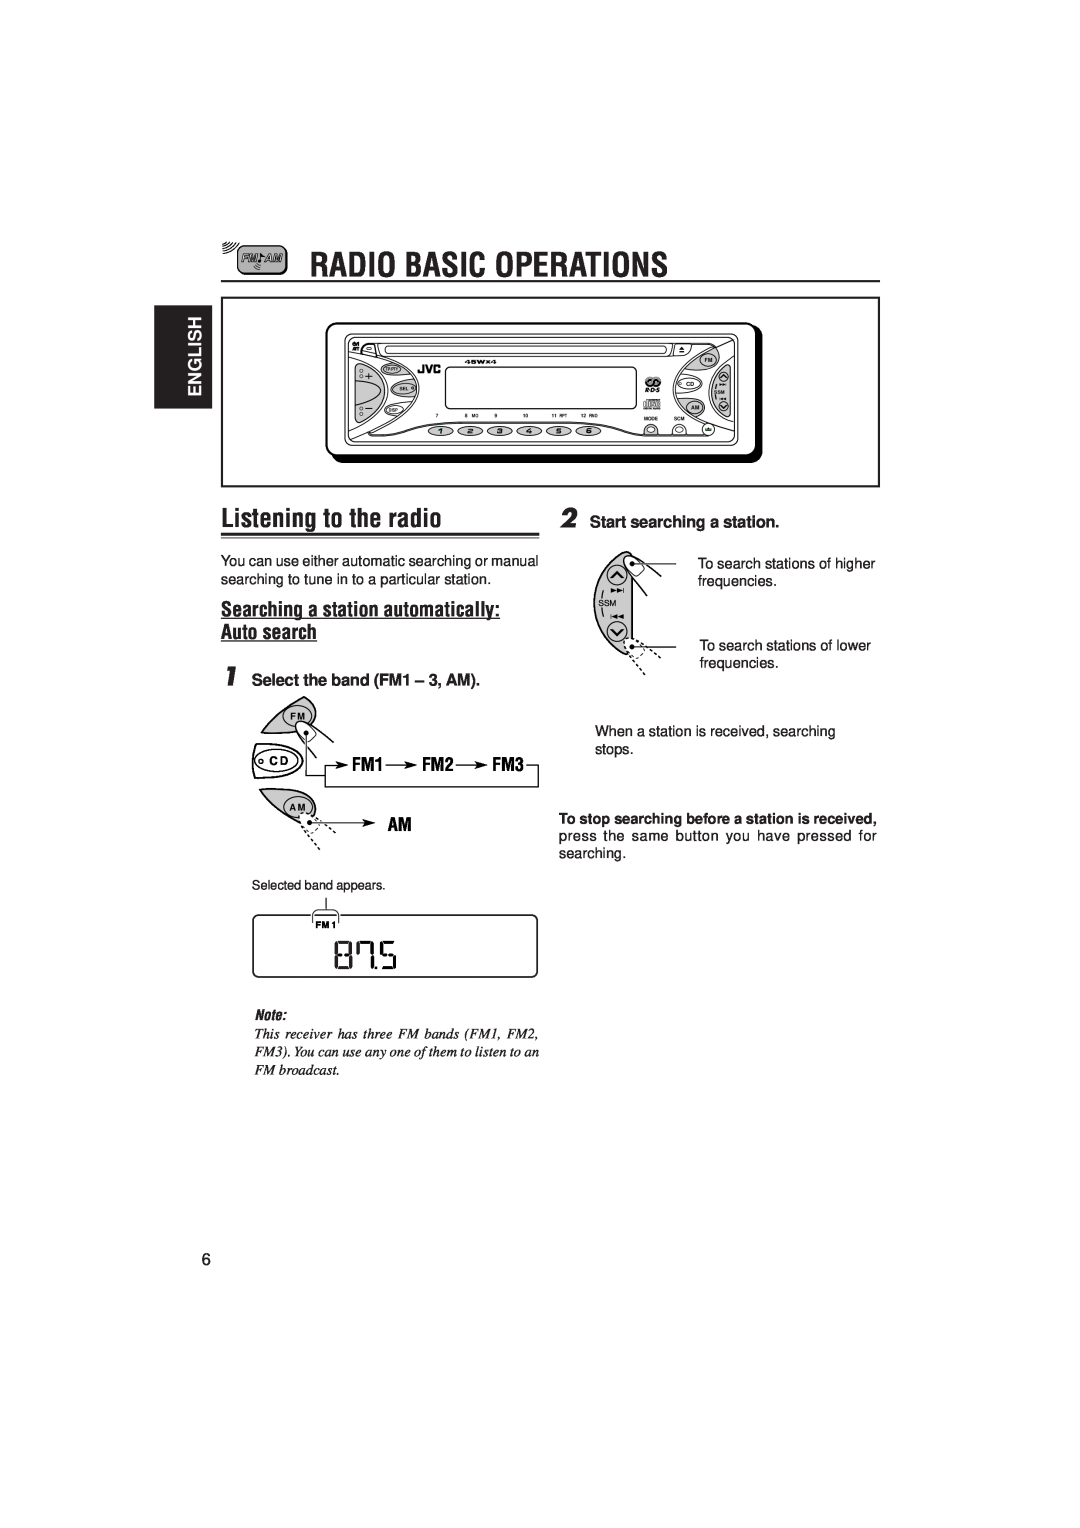 JVC KD-S871R Radio Basic Operations, Listening to the radio, Auto search, C D FM1 FM2 FM3, English, Selected band appears 